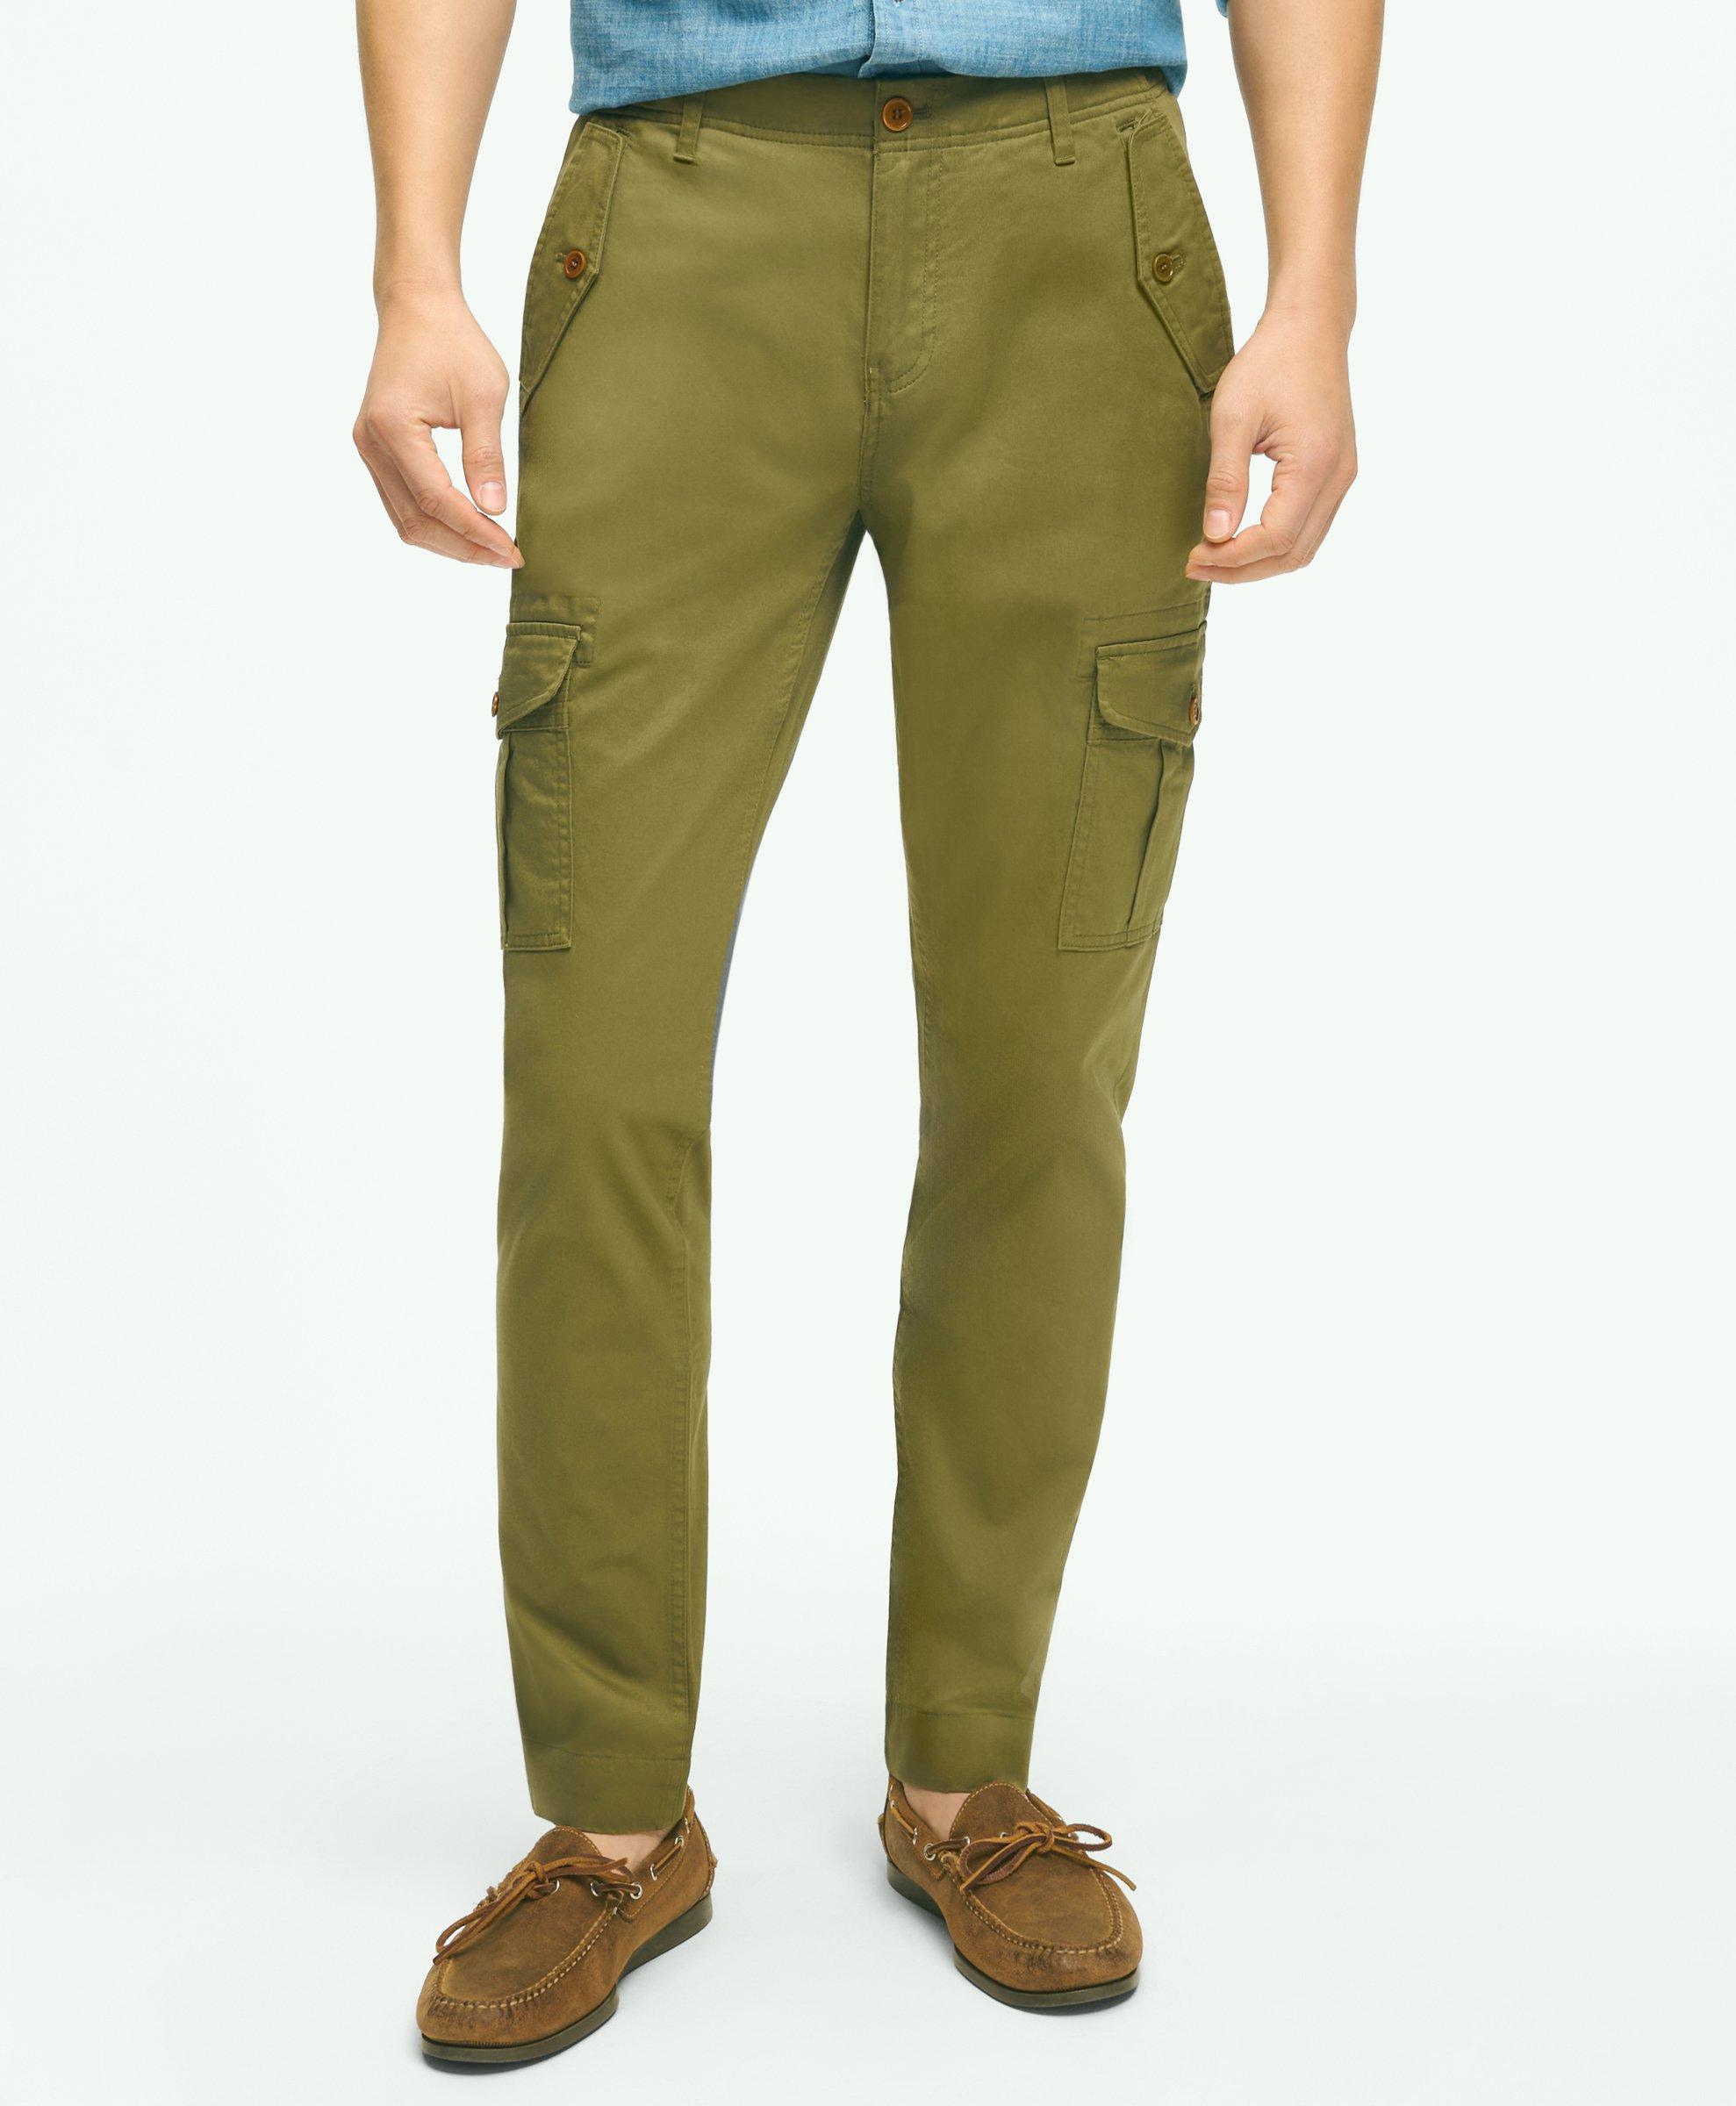 Best Men's Comfortable Stretchy Hiking Pants - Olive (Tall